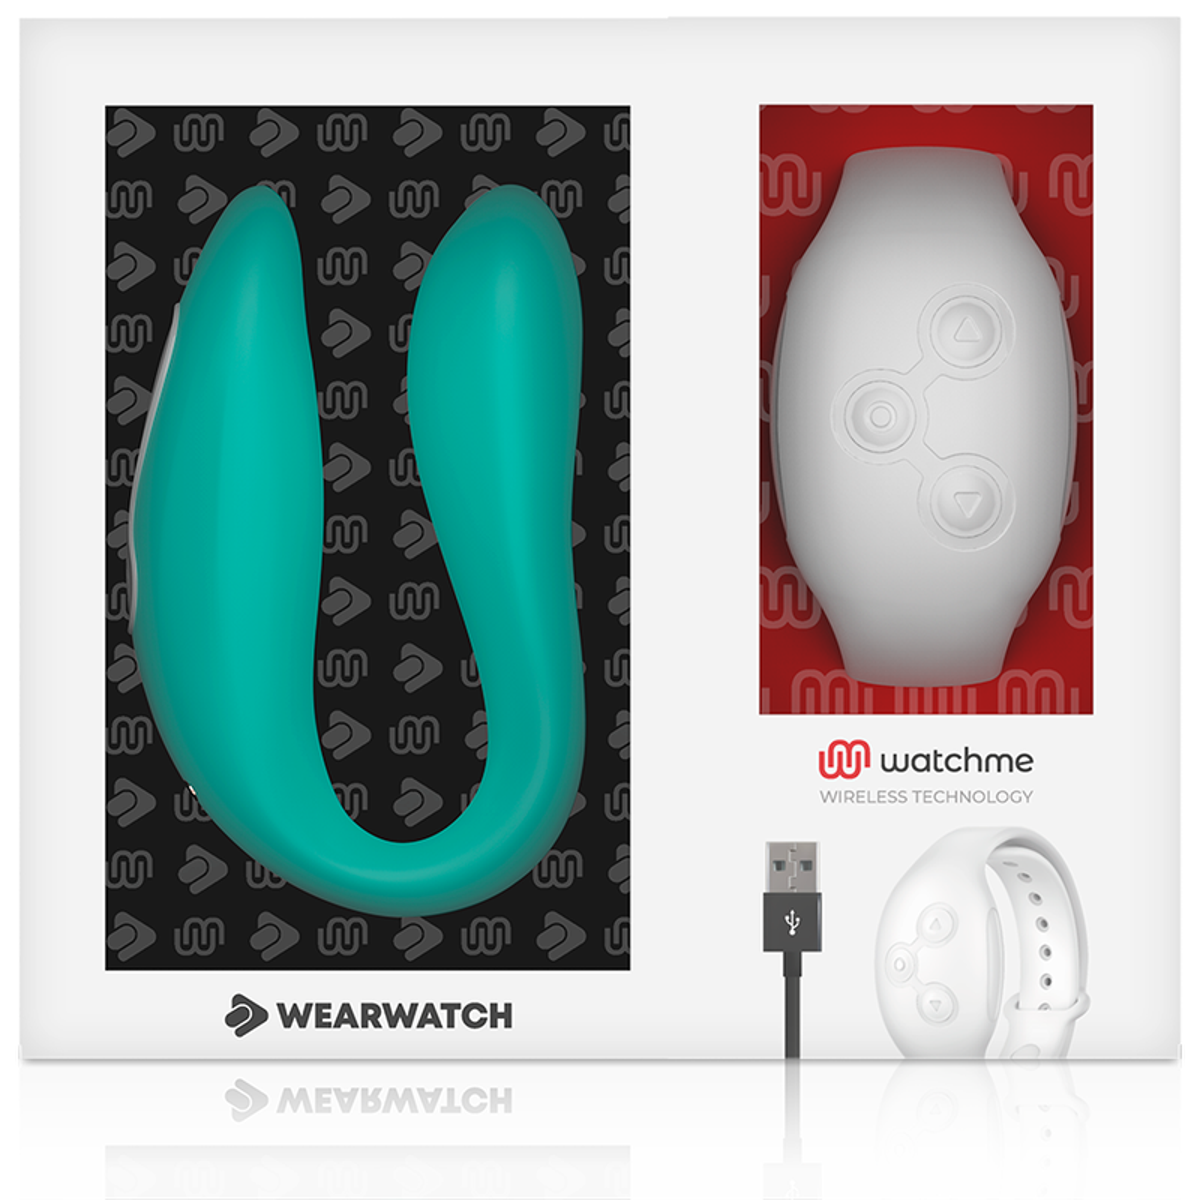 Paarvibrator "Dual Pleasures" mit Bluetooth-Funktion - OH MY! FANTASY